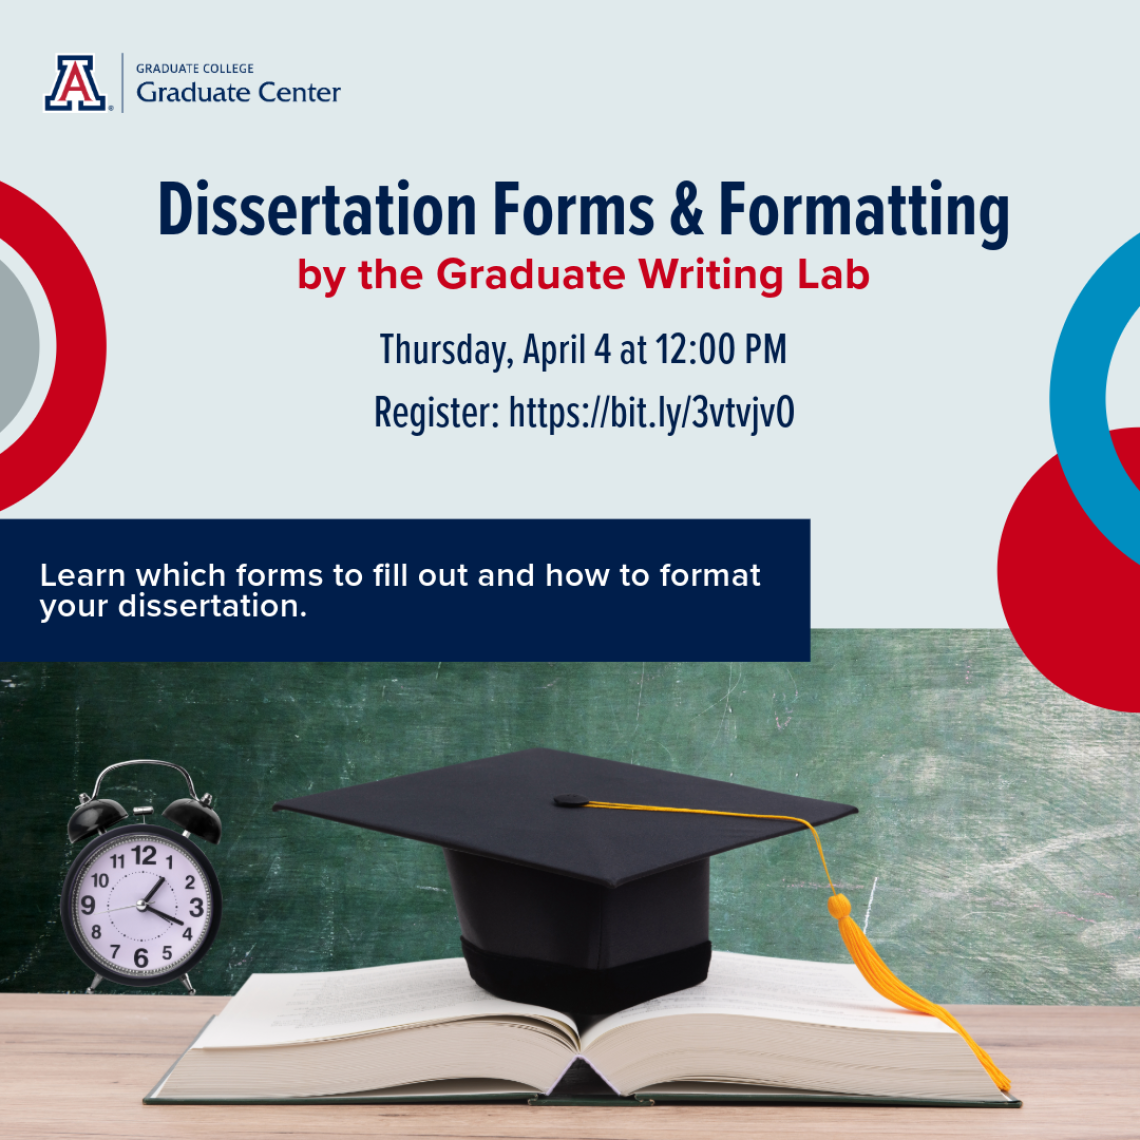 image with information regarding the dissertation forms and formatting workshop. Same information is provided below. 